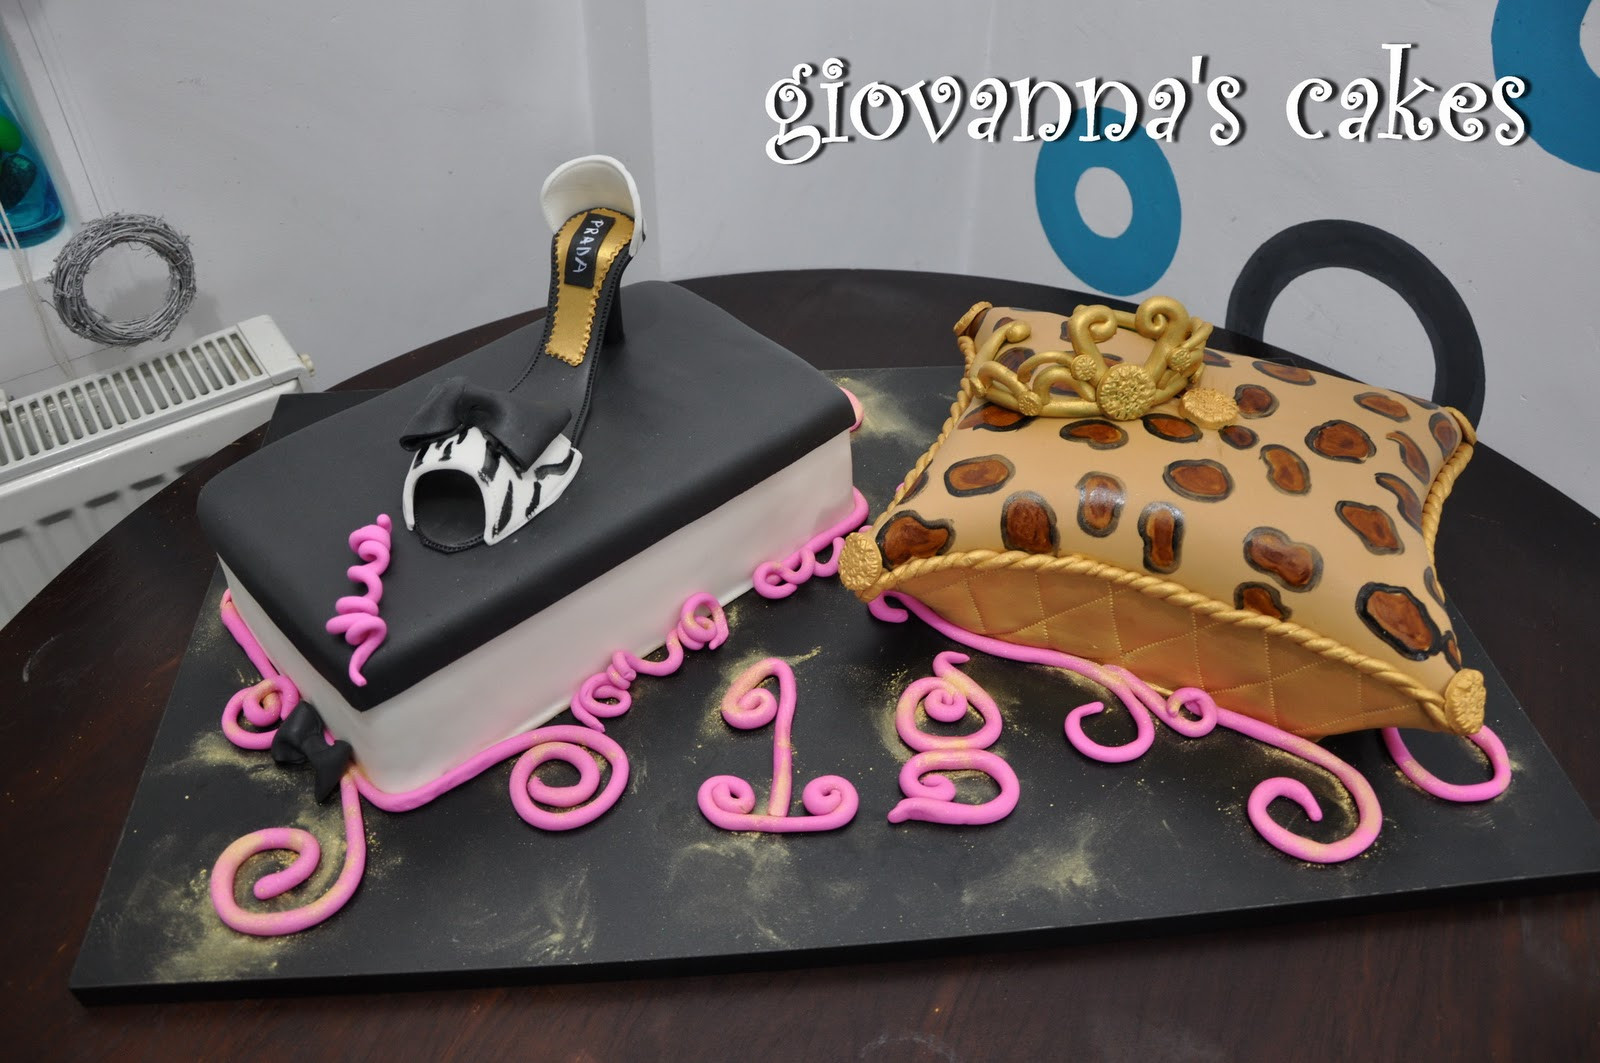 18 Year Old Birthday Cakes
 giovanna s cakes Fashionista 18 year old princess